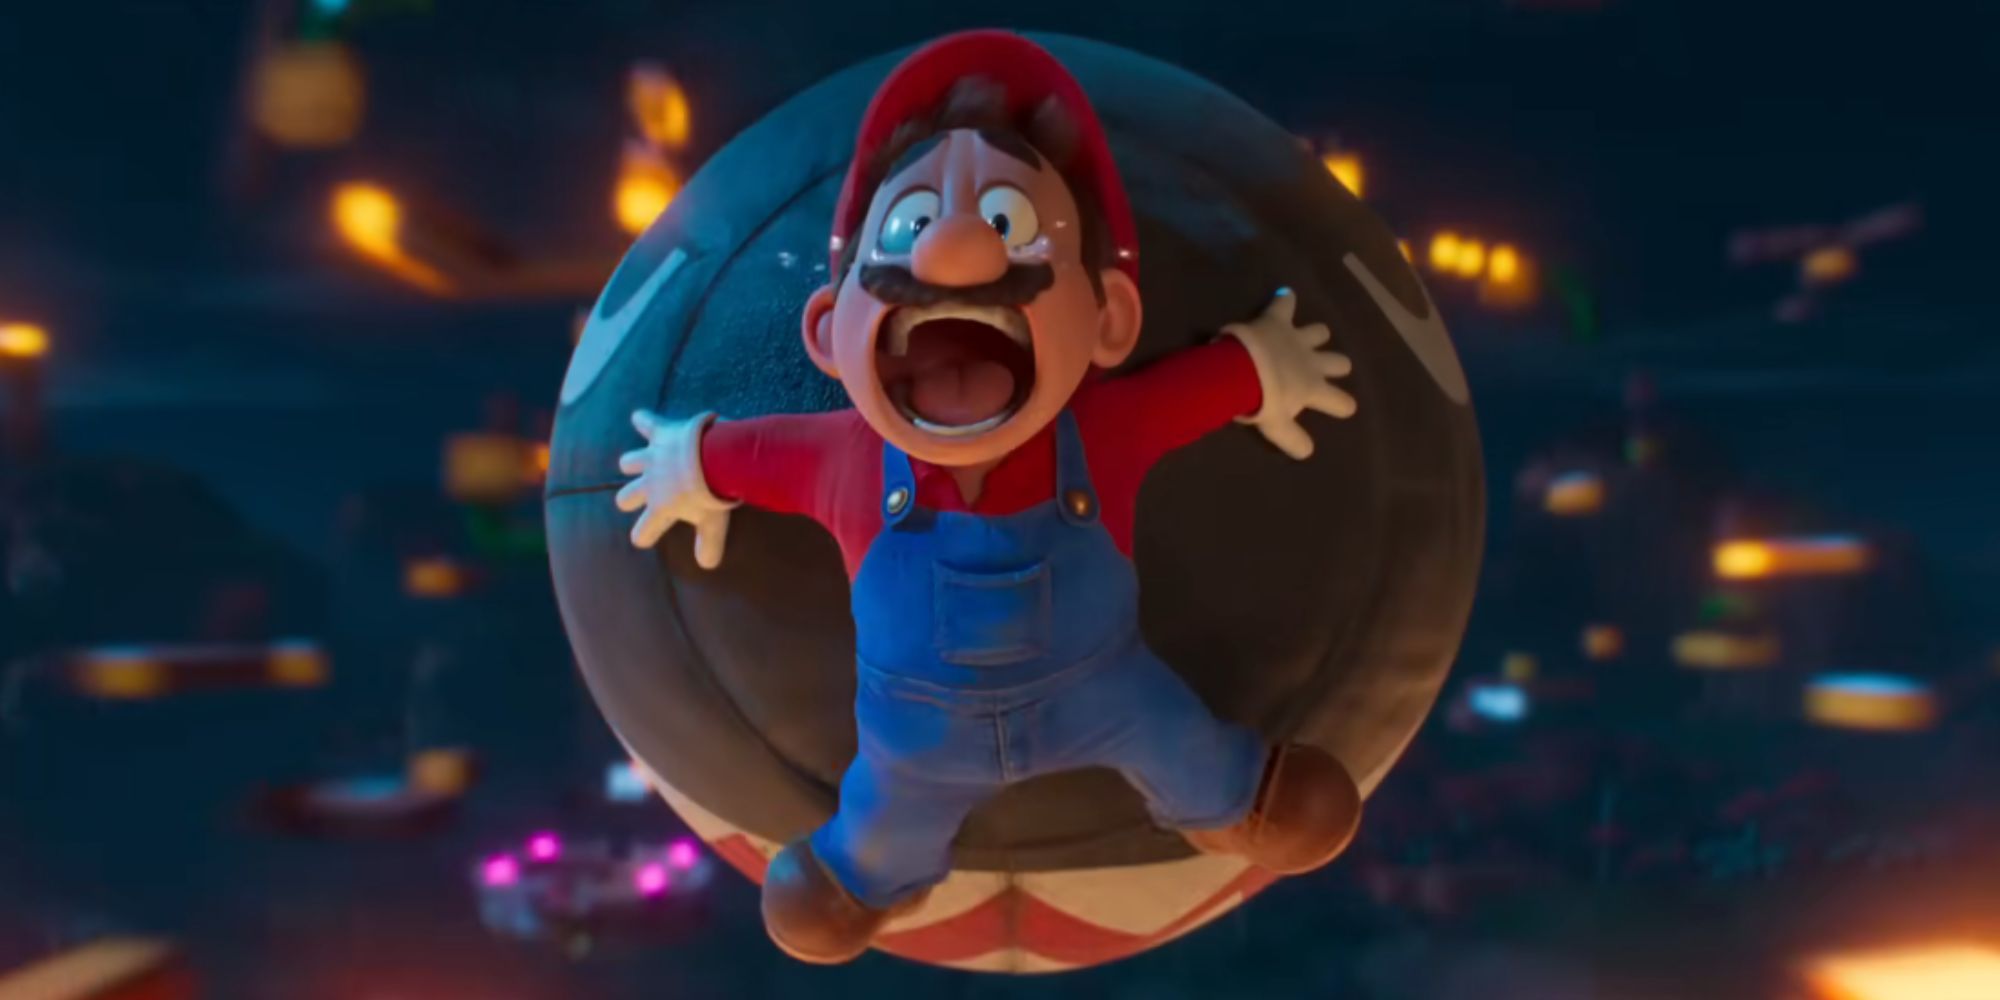 The Super Mario Bros.  In the Movie, Bullet Bill carries Mario through the air at night.